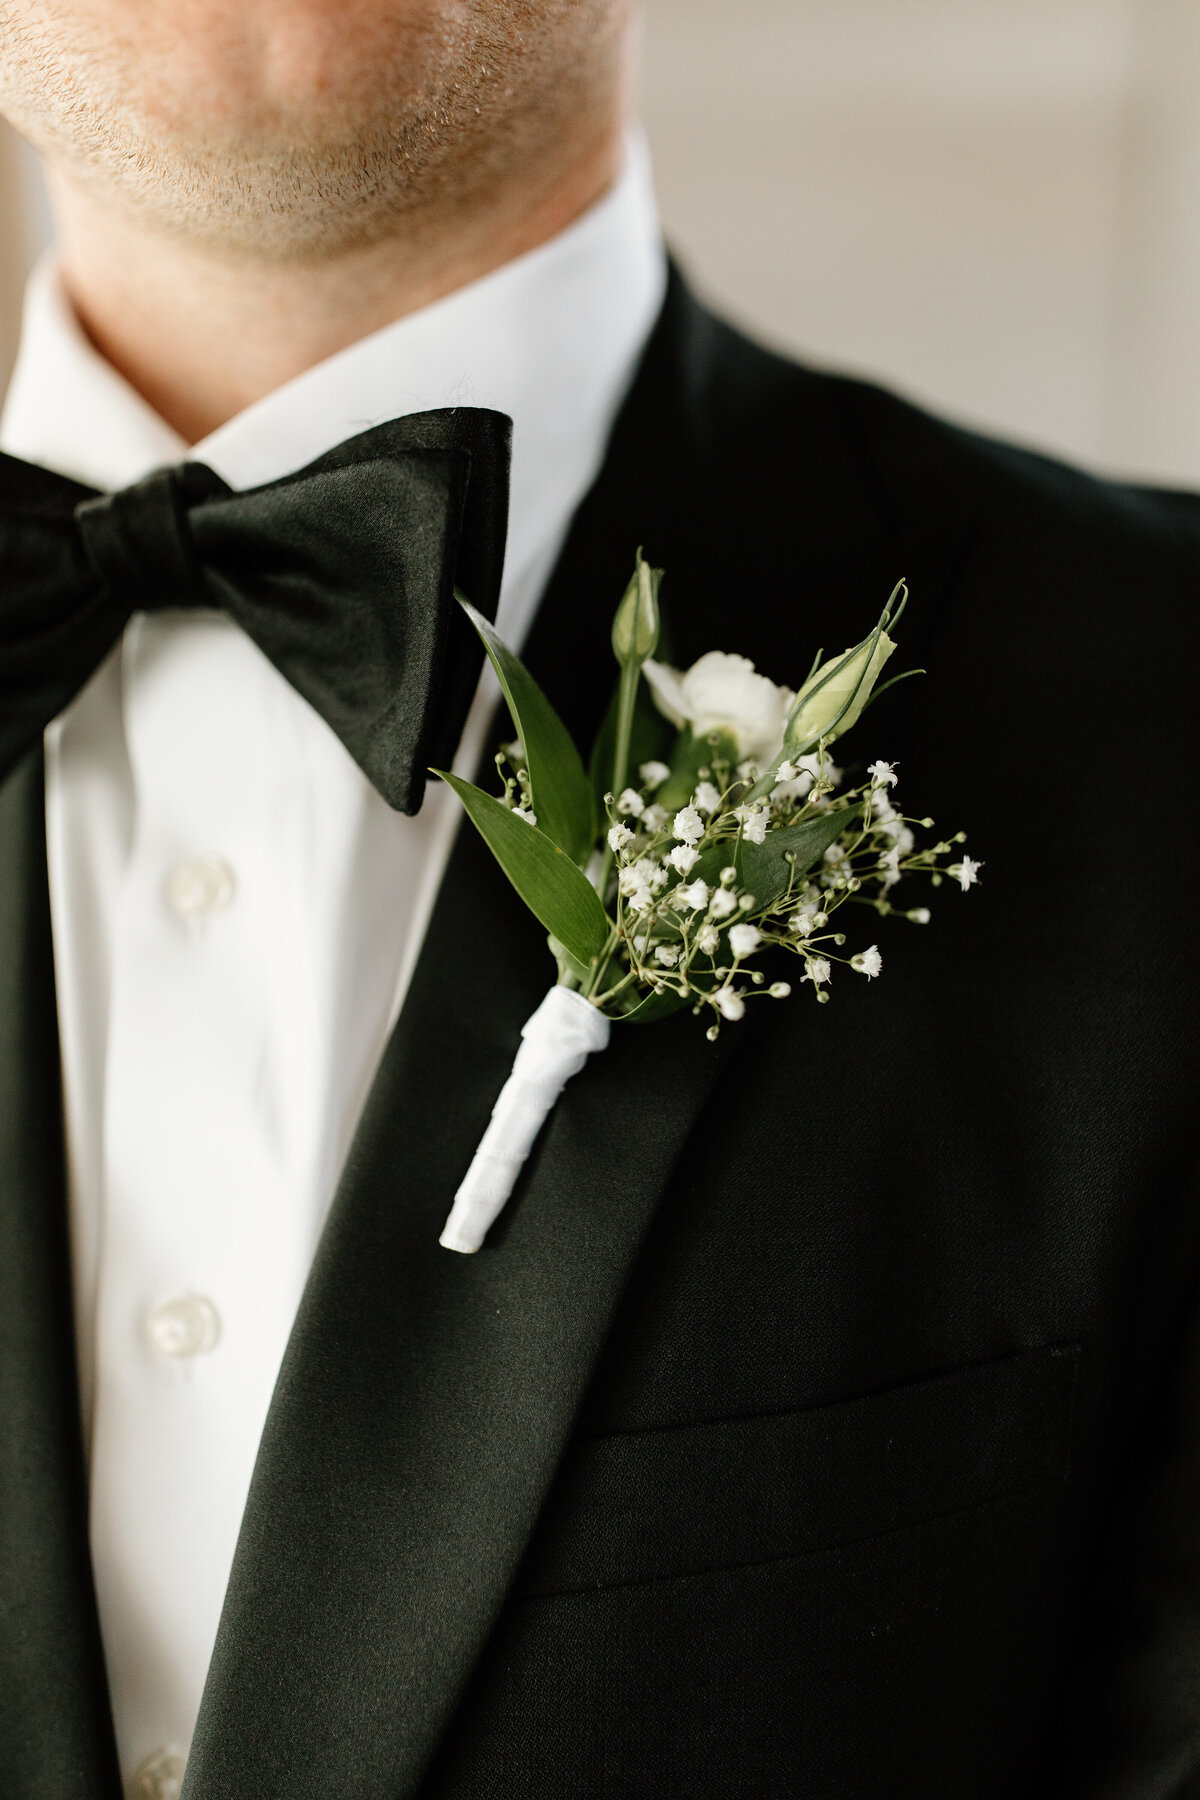 Grooms elegant and simple boutonniere design